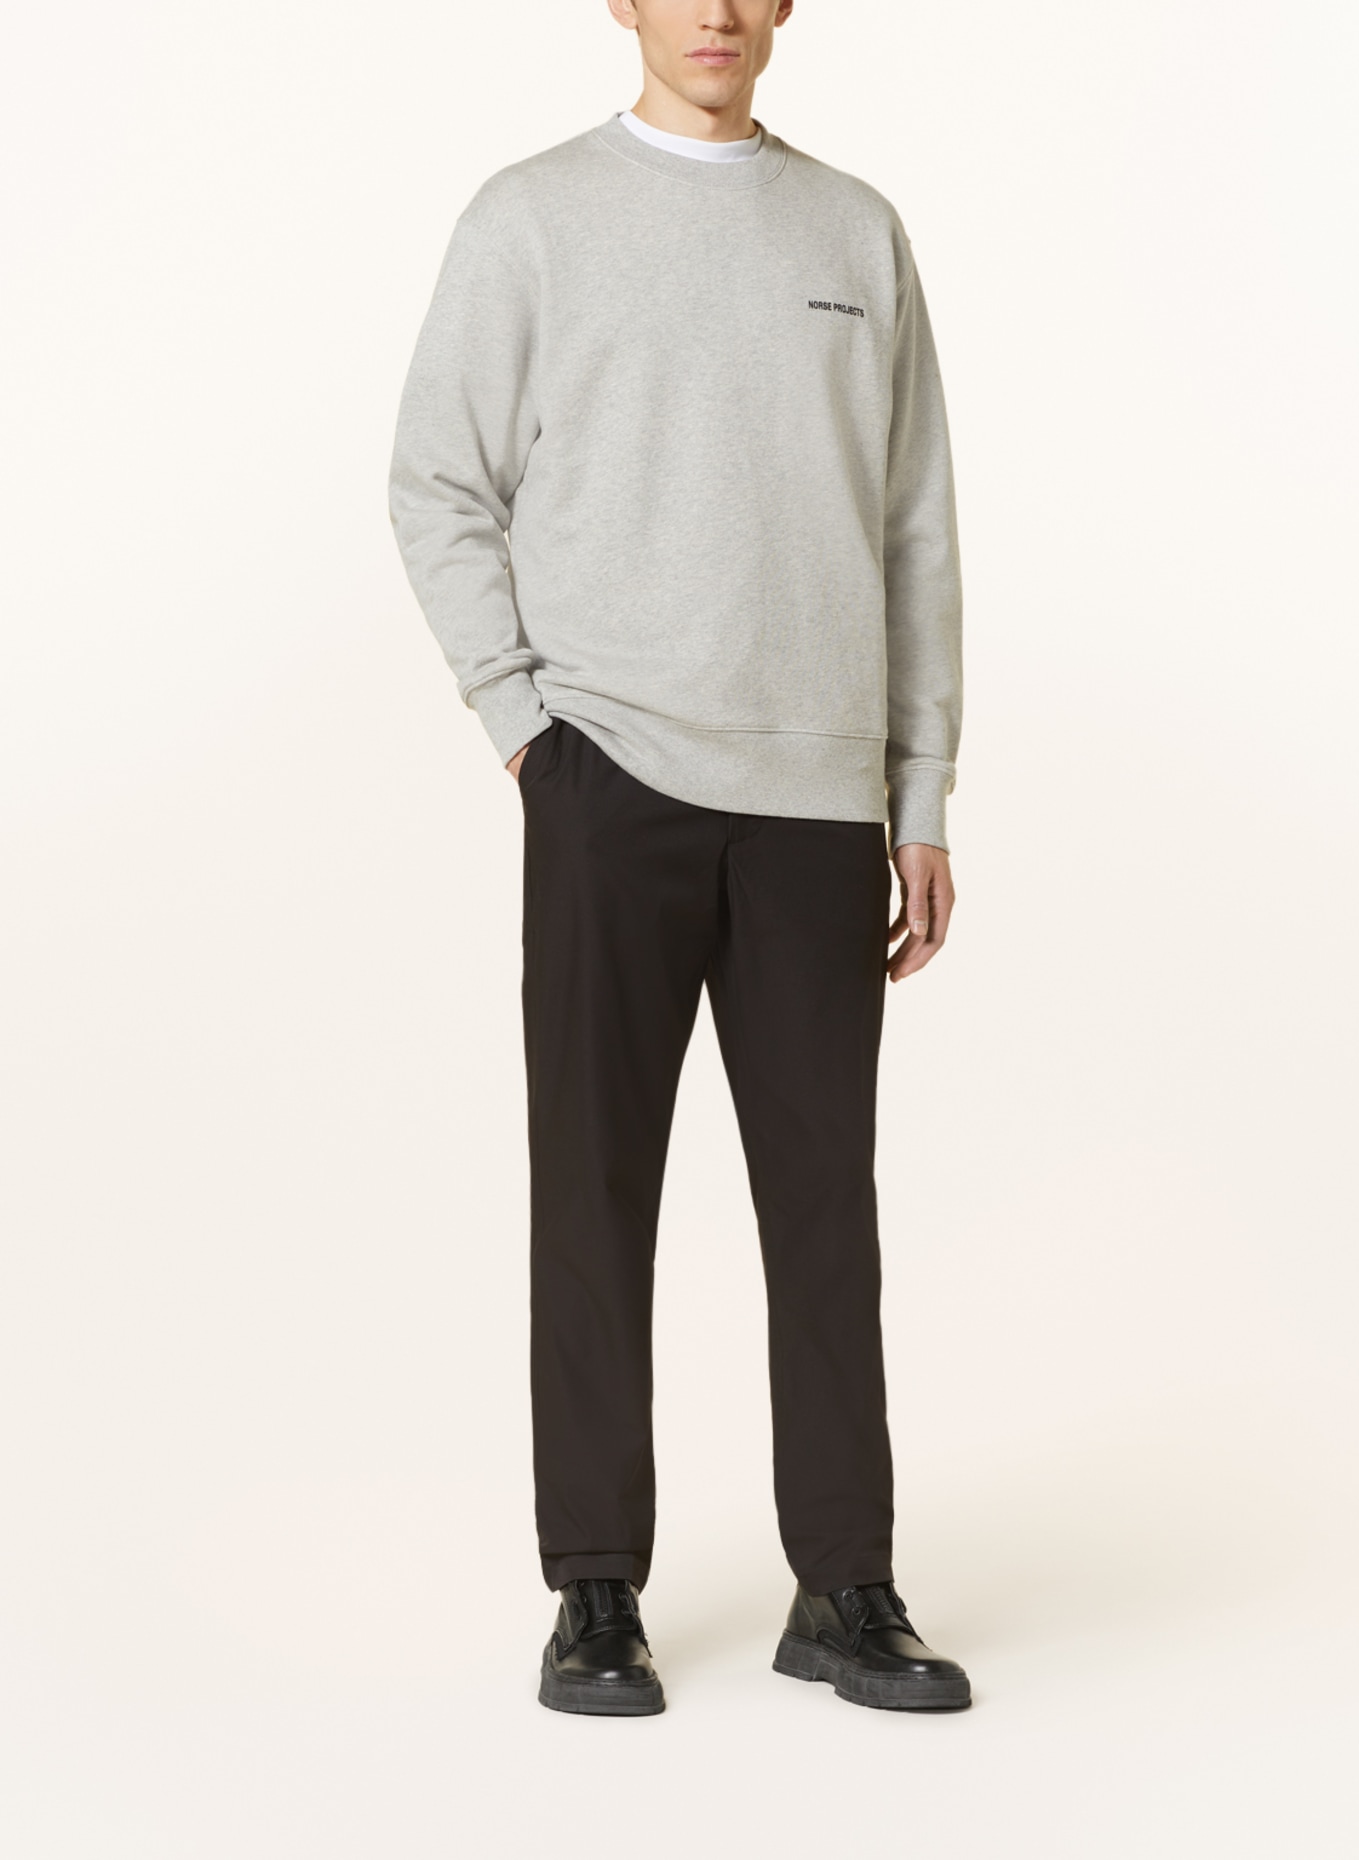 NORSE PROJECTS Sweatshirt ARNE, Color: LIGHT GRAY (Image 2)